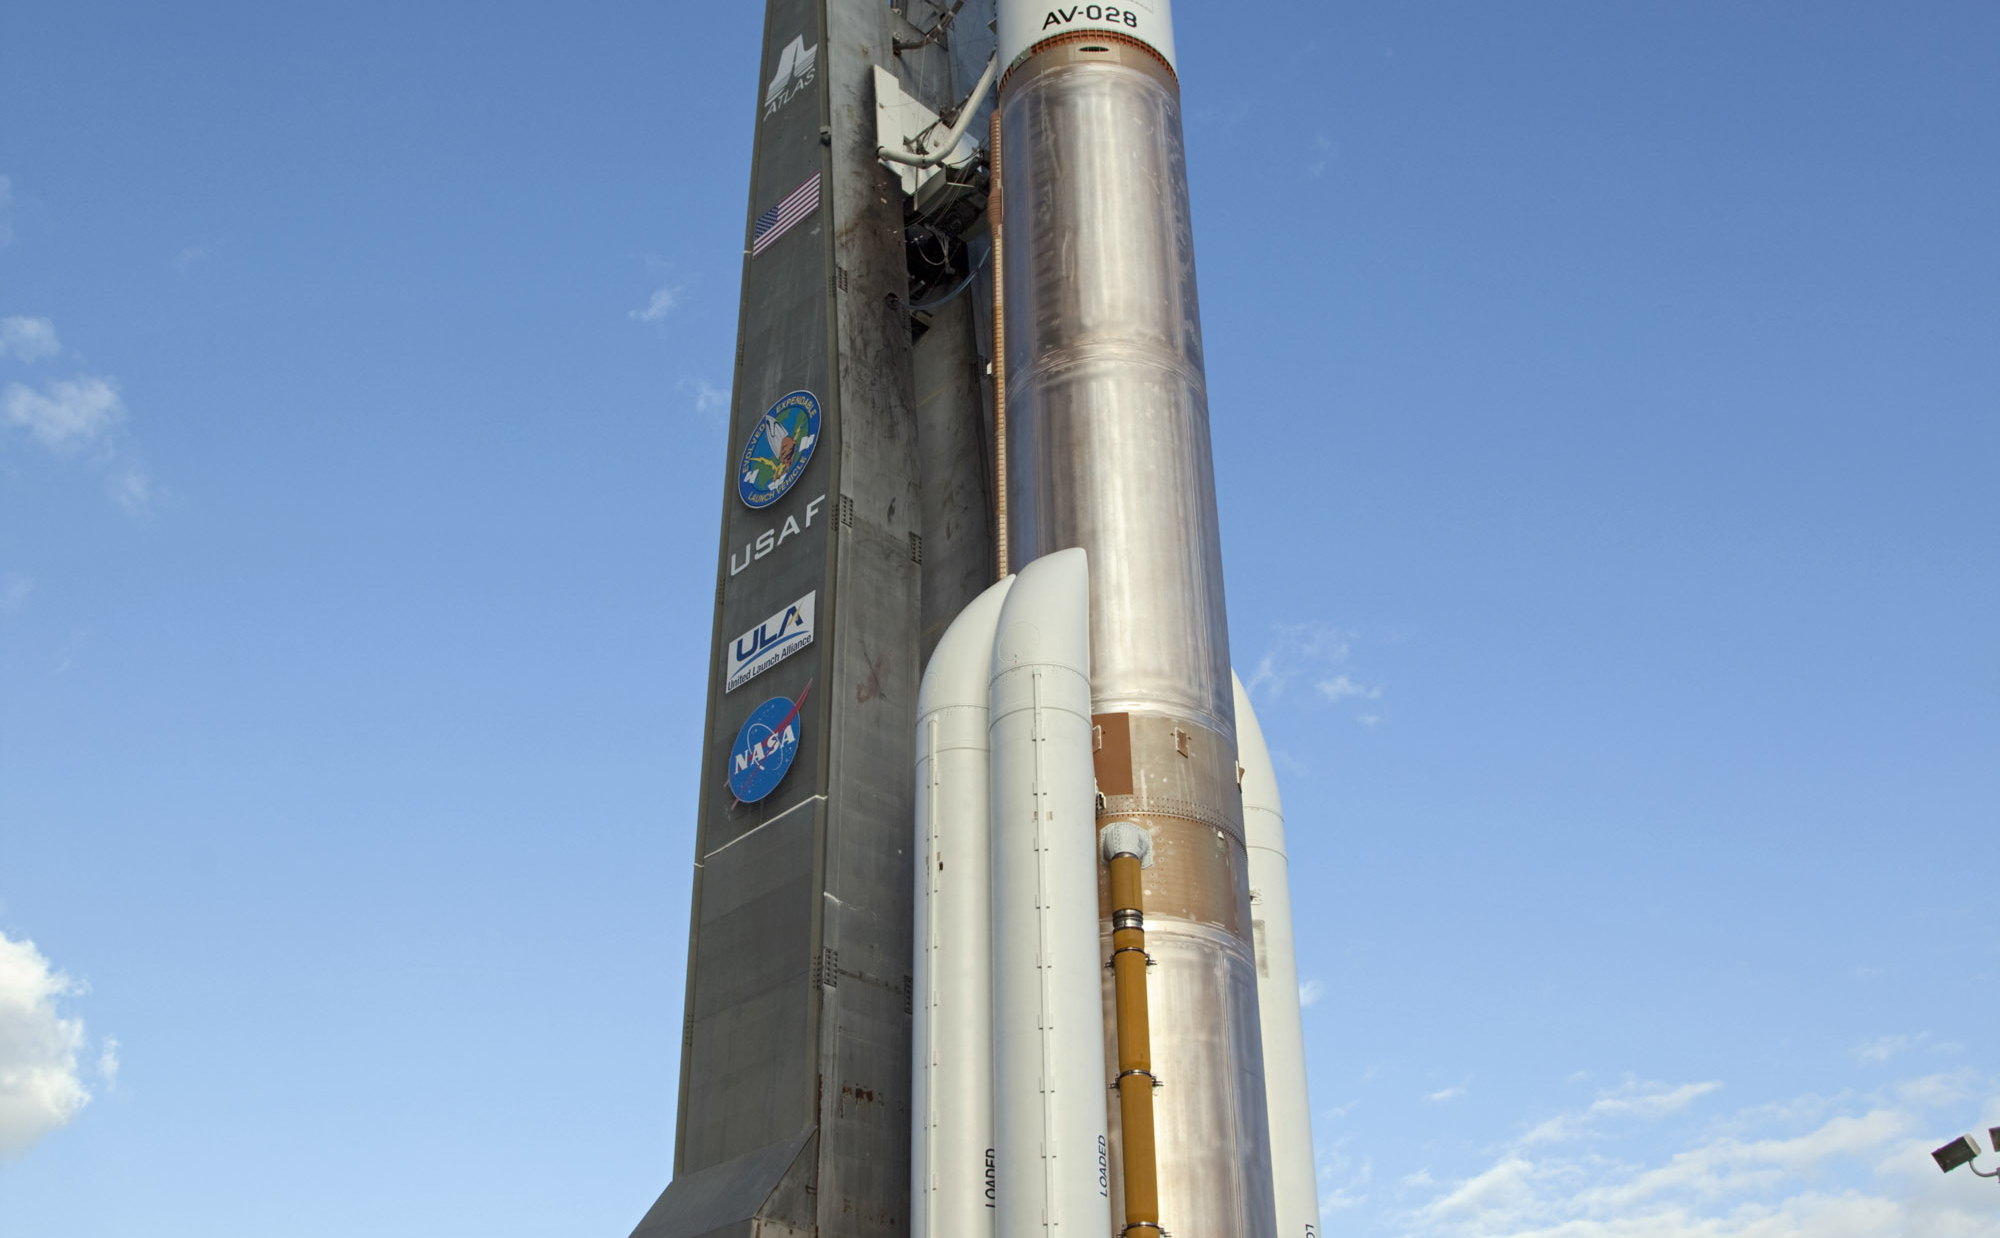 On Cape Canaveral Air Force Station in Florida, the 197-foot-tall United Launch Alliance Atlas V rocket is backdropped by a bright blue sky as the vehicle rolls from the Vertical Integration Facility (VIF) to the launch pad at Space Launch Complex 41.